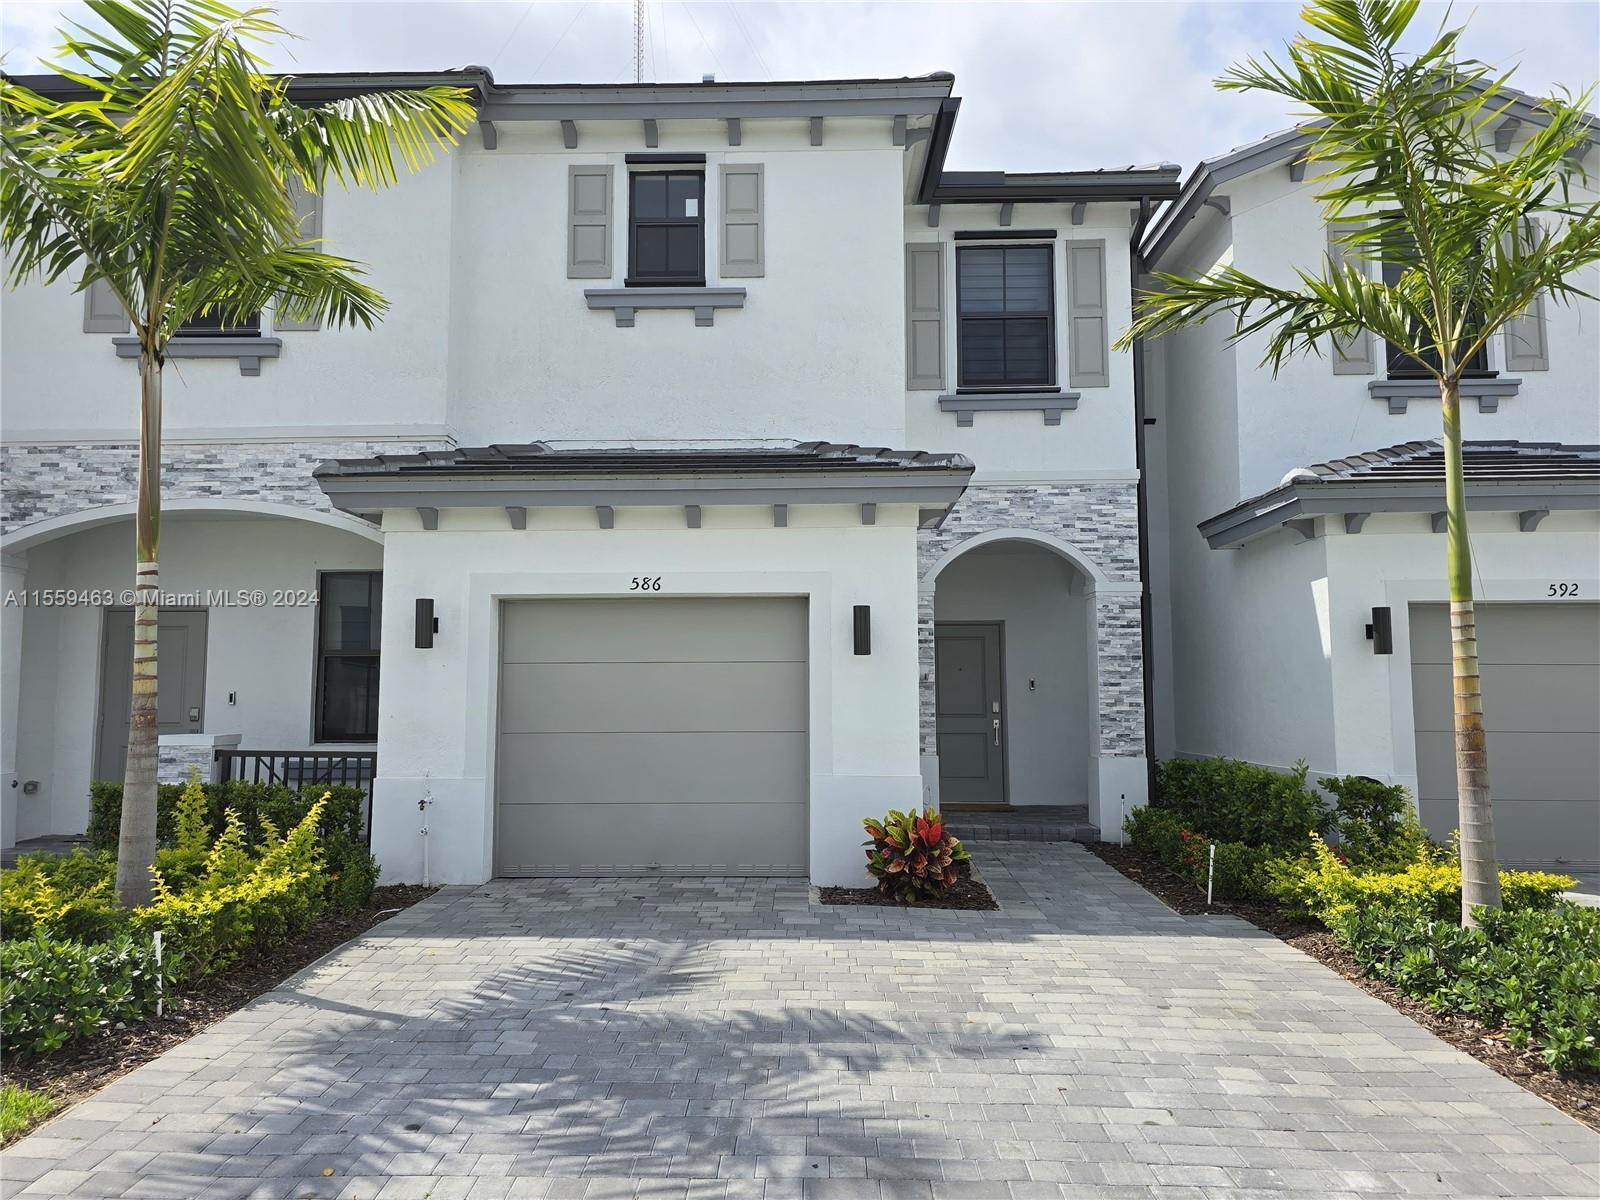 Photo of 586 NW 203 Ter in Miami Gardens, FL